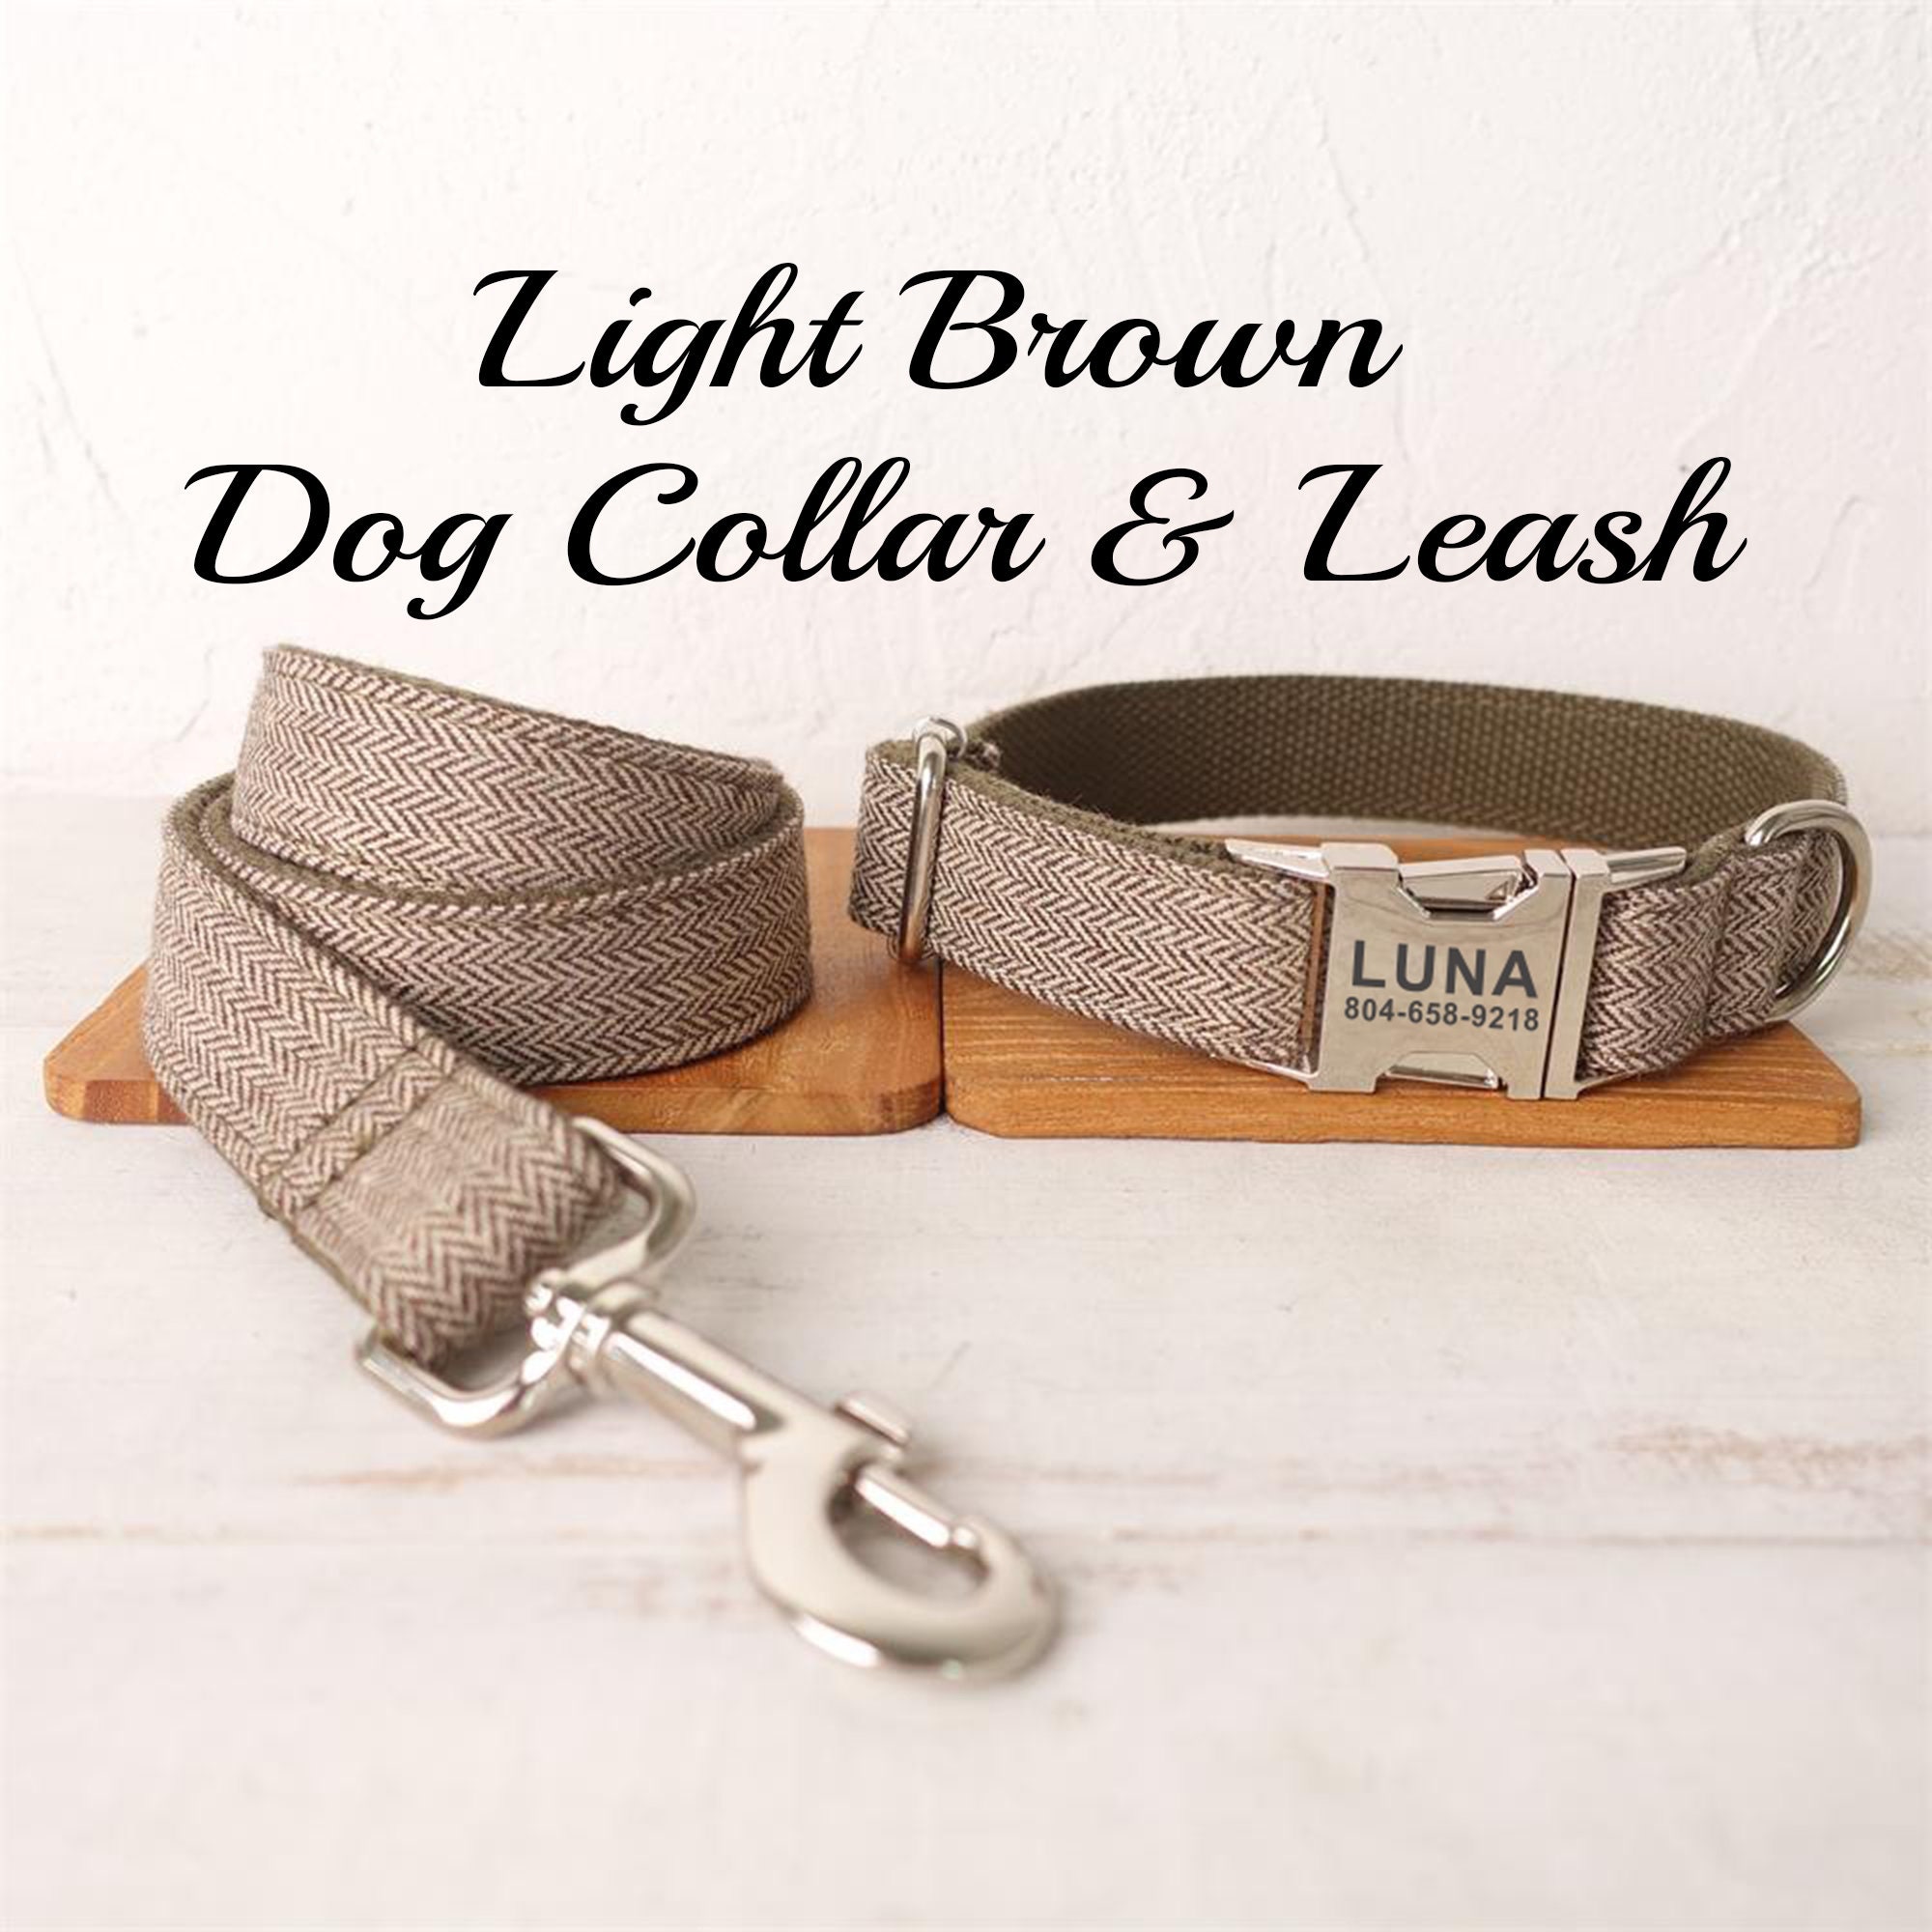 Ascot Leash - Brown Leather Hand Made Dog Leash